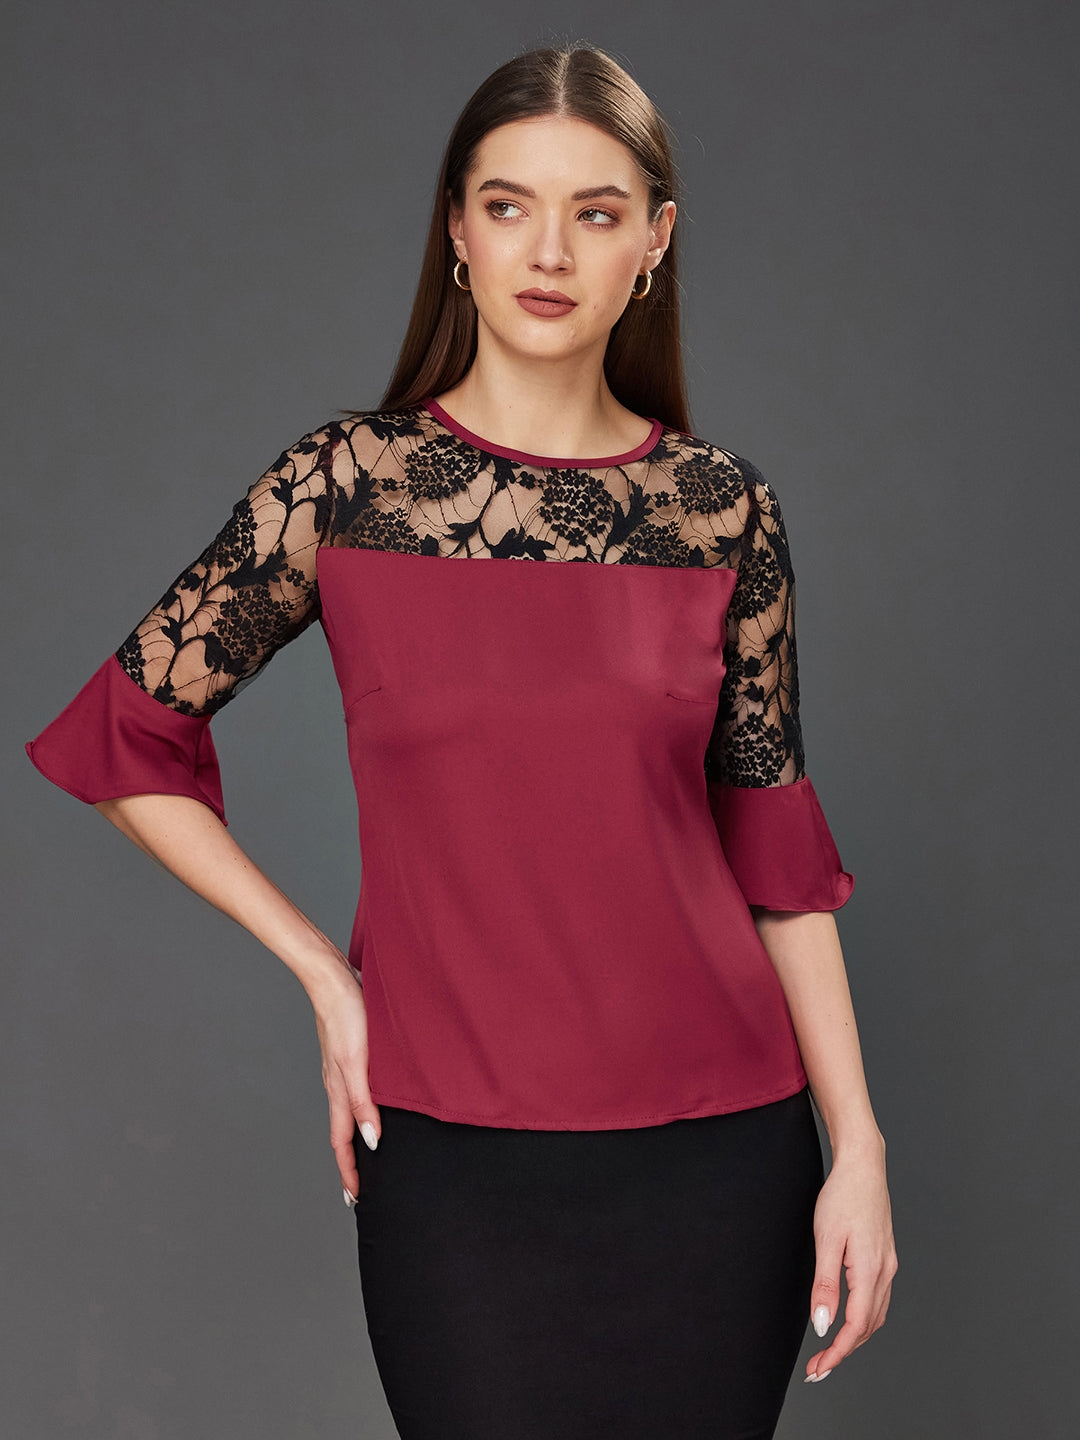 Maroon & Black Solid Round Neck 3/4 Sleeve Relaxed Fit Regular Top